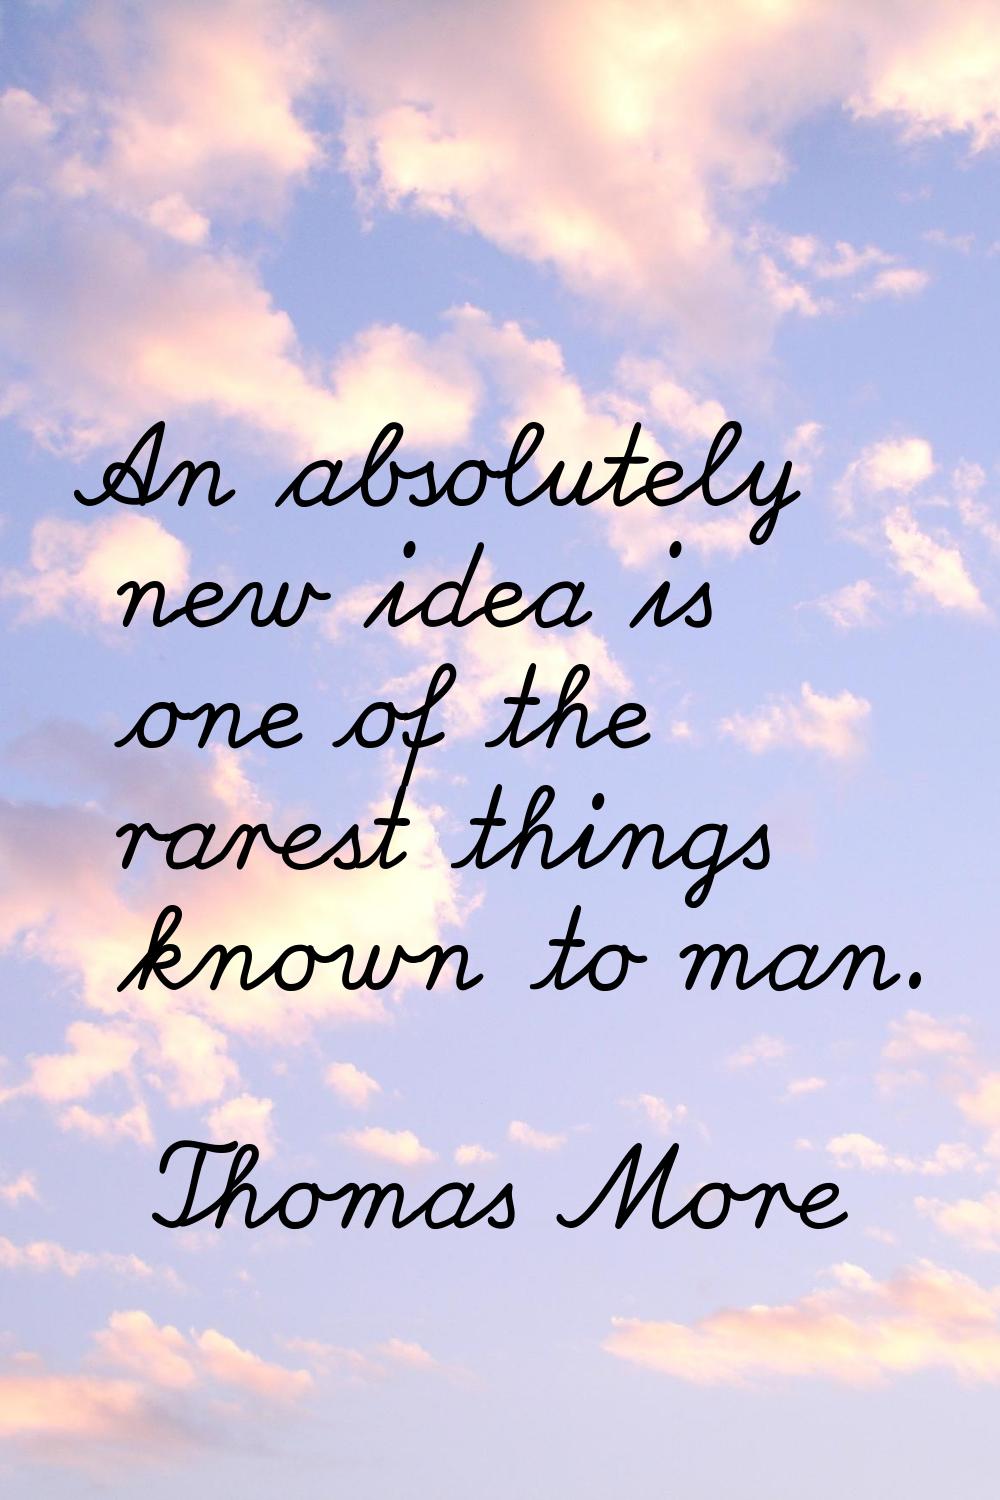 An absolutely new idea is one of the rarest things known to man.